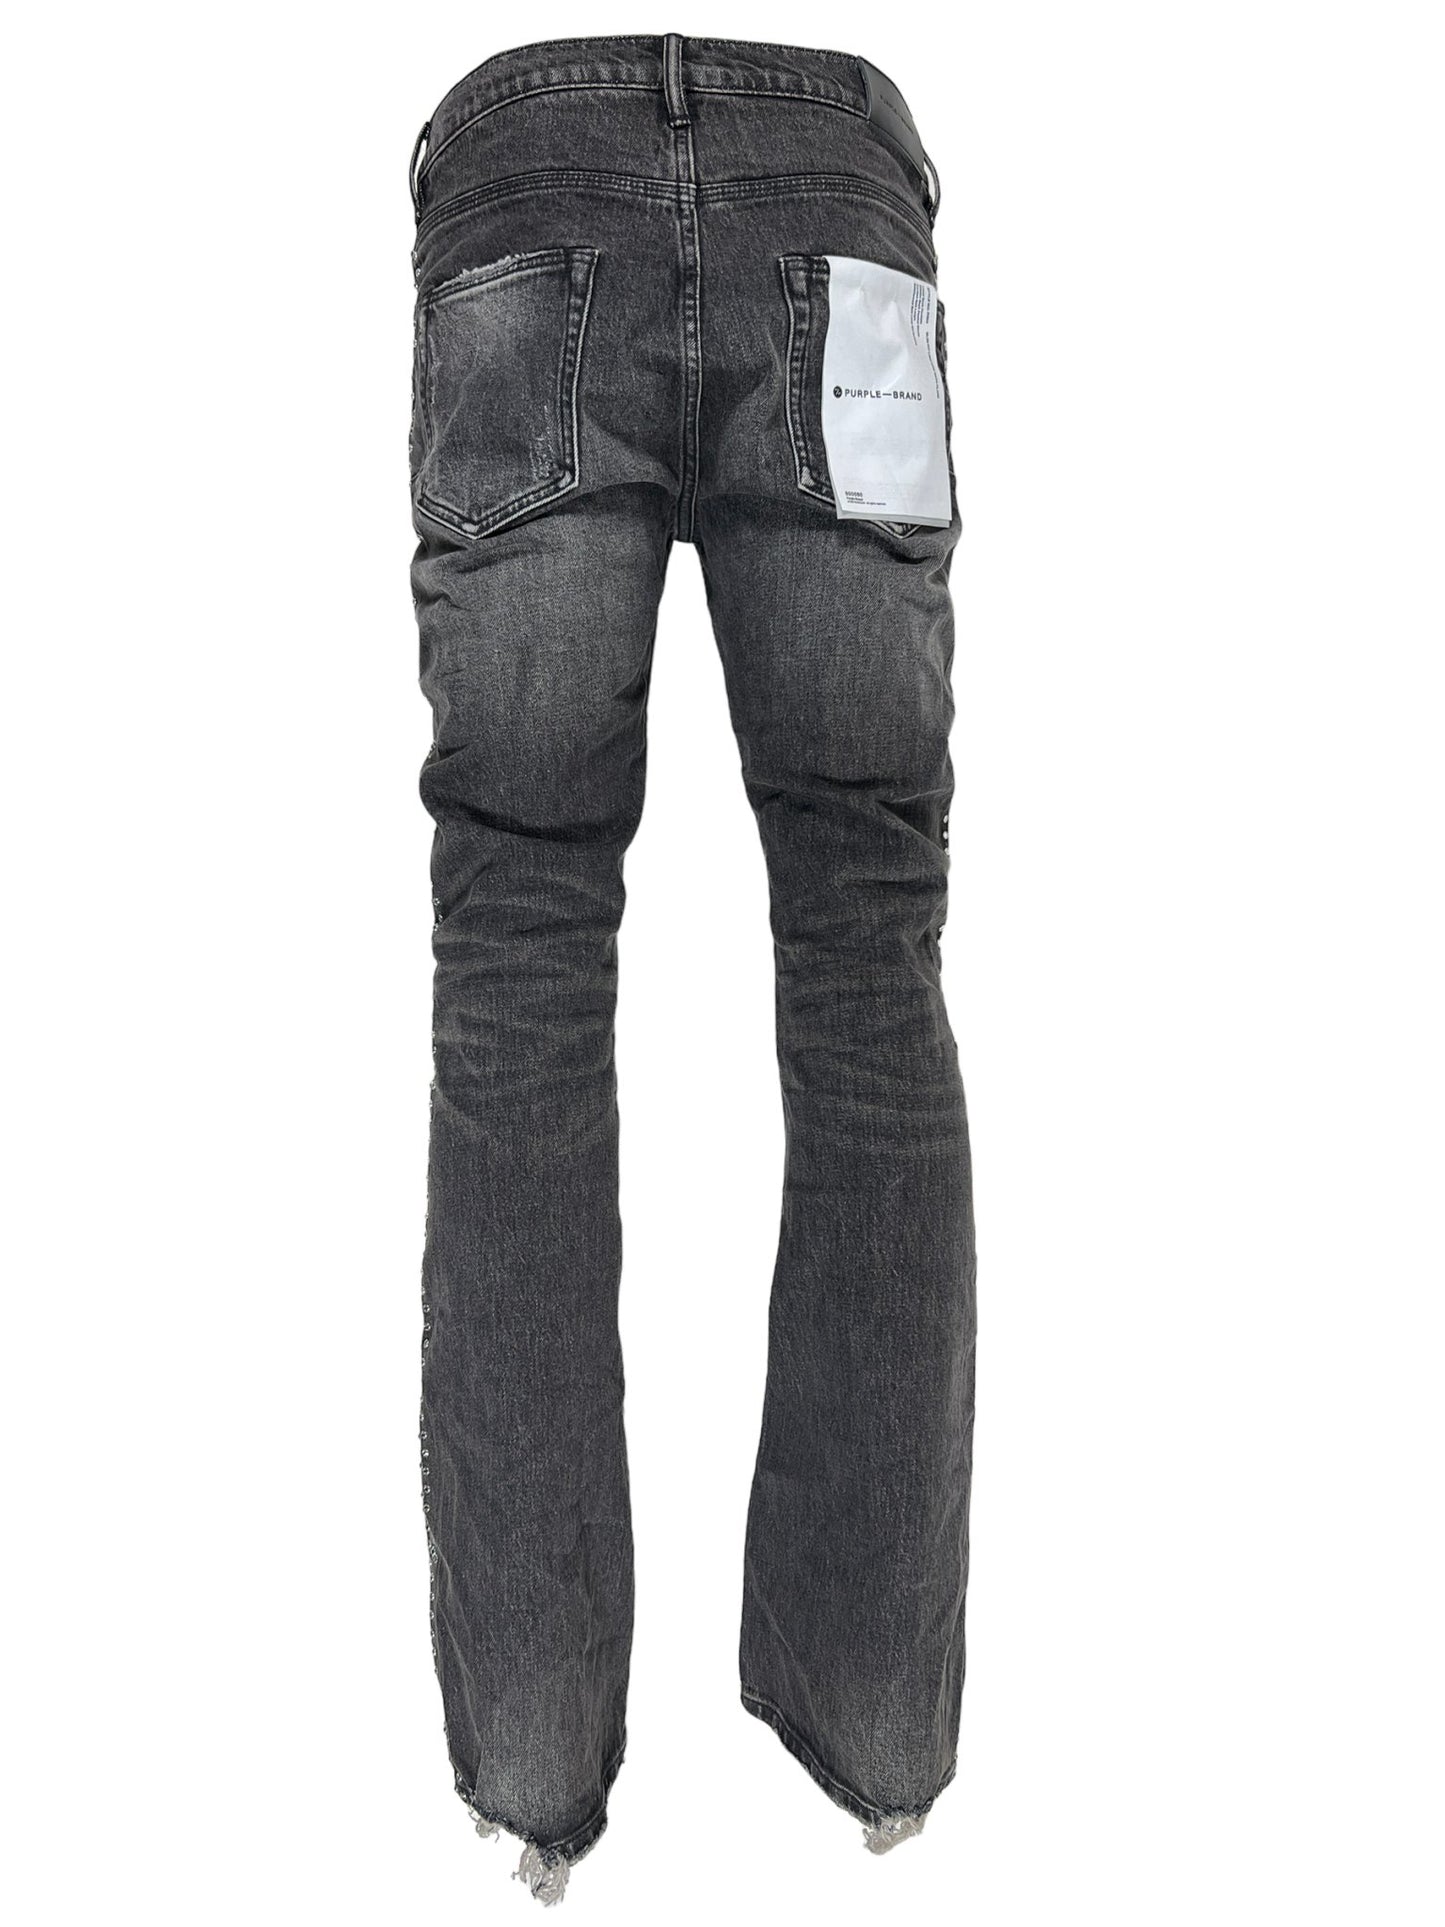 The back view of a pair of PURPLE BRAND P004-VNBL VINTAGE FLARE BLACK stretch denim jeans.